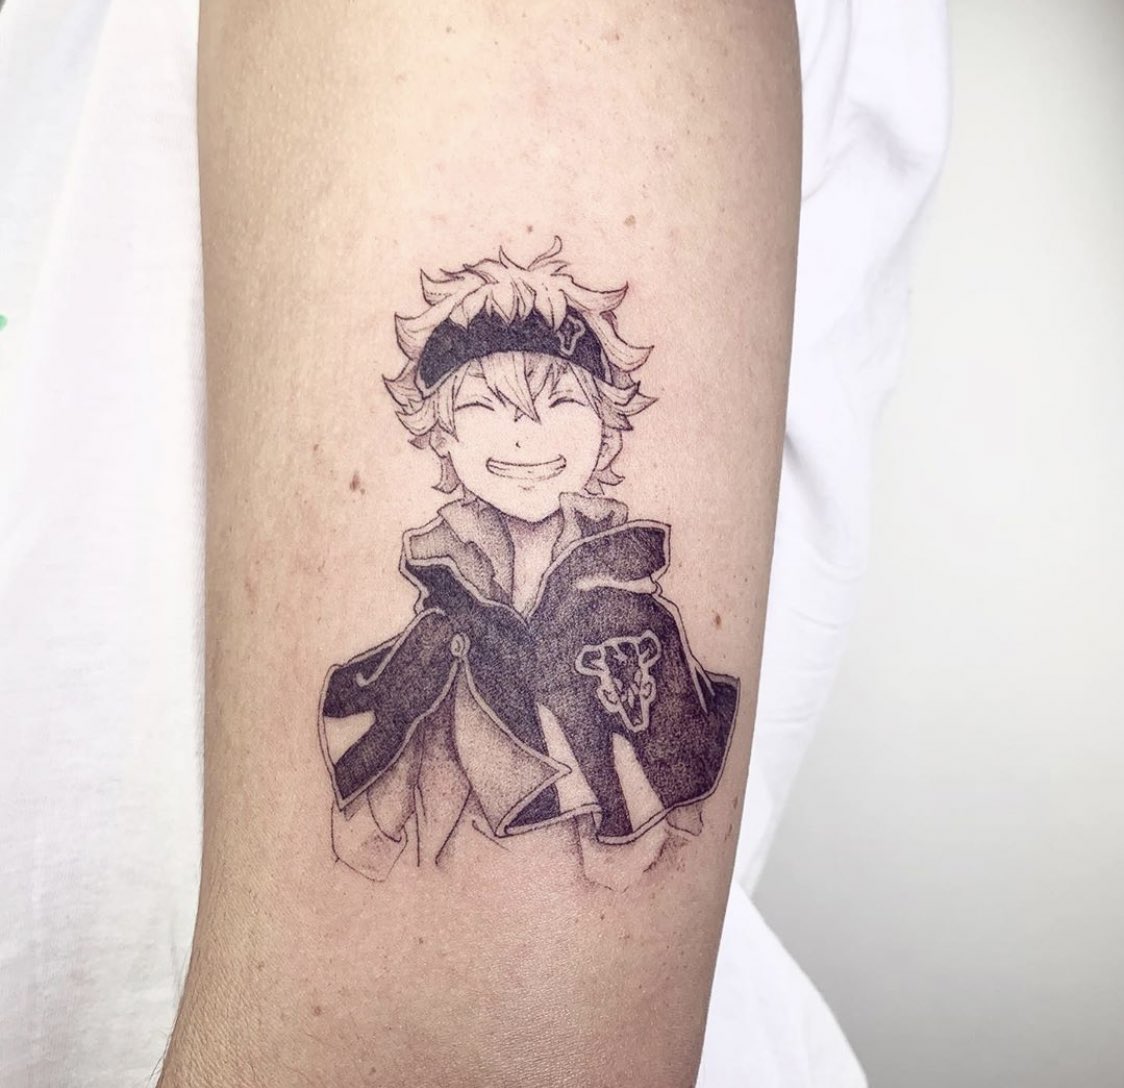 Yall dig it  rBlackClover